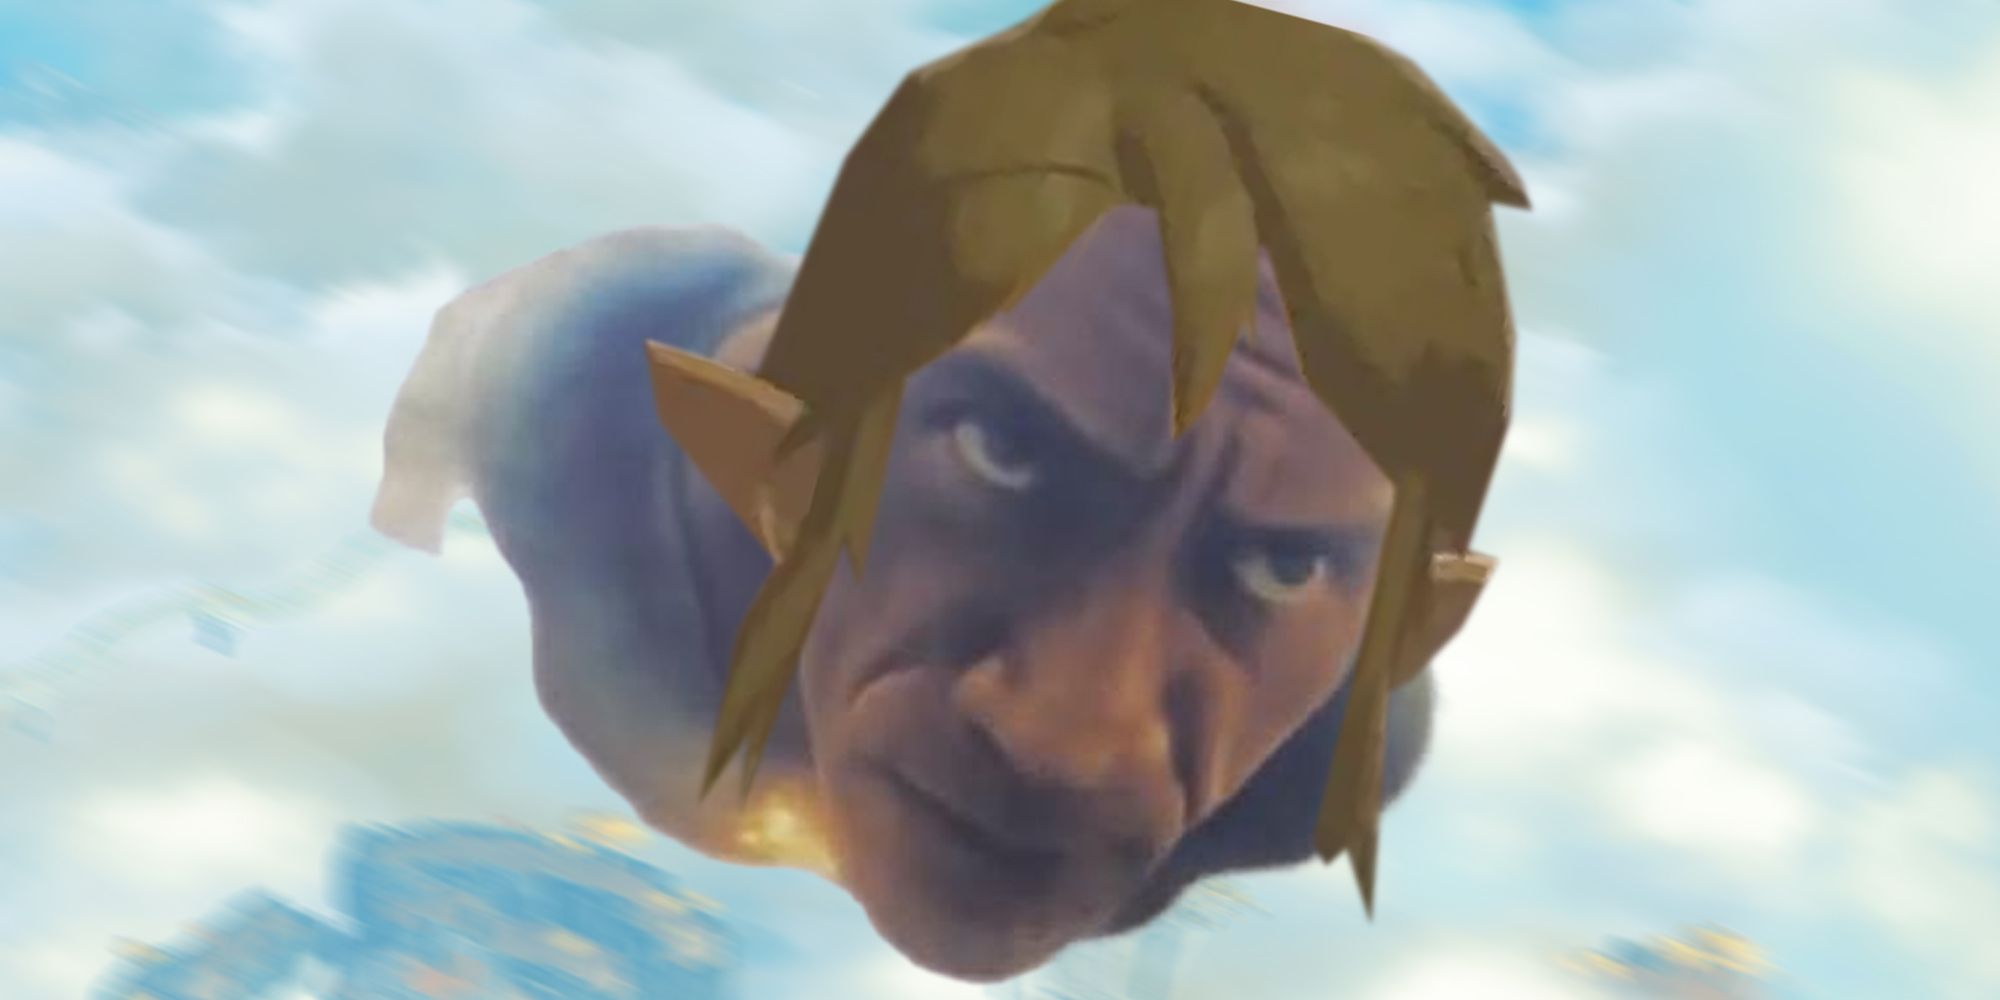 Black Adam flying with Link's hair